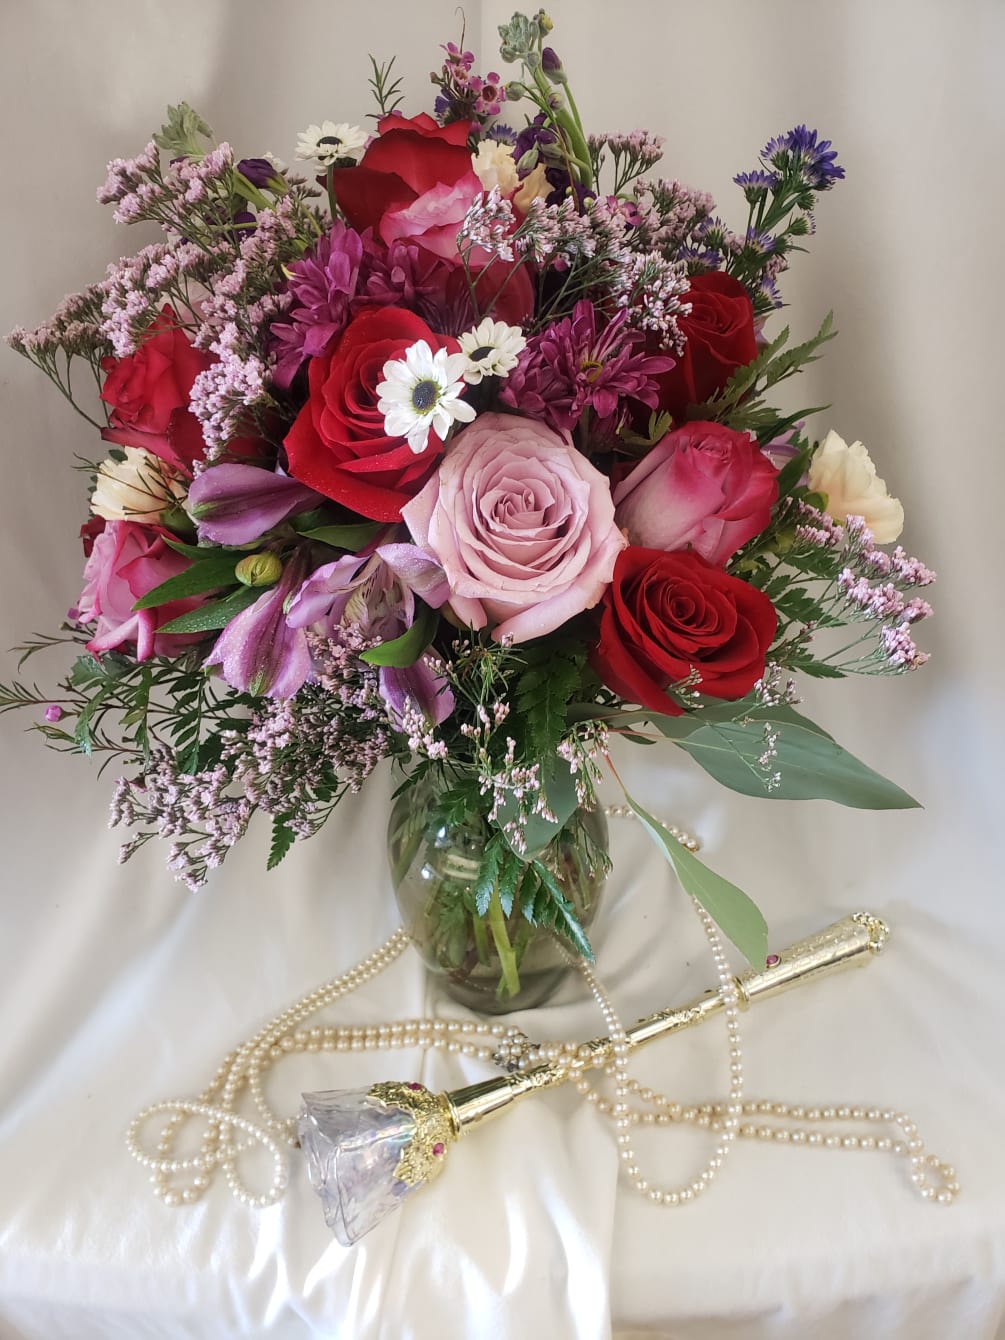 Elegant arrangement to honor the Queen in your life! Very regal with